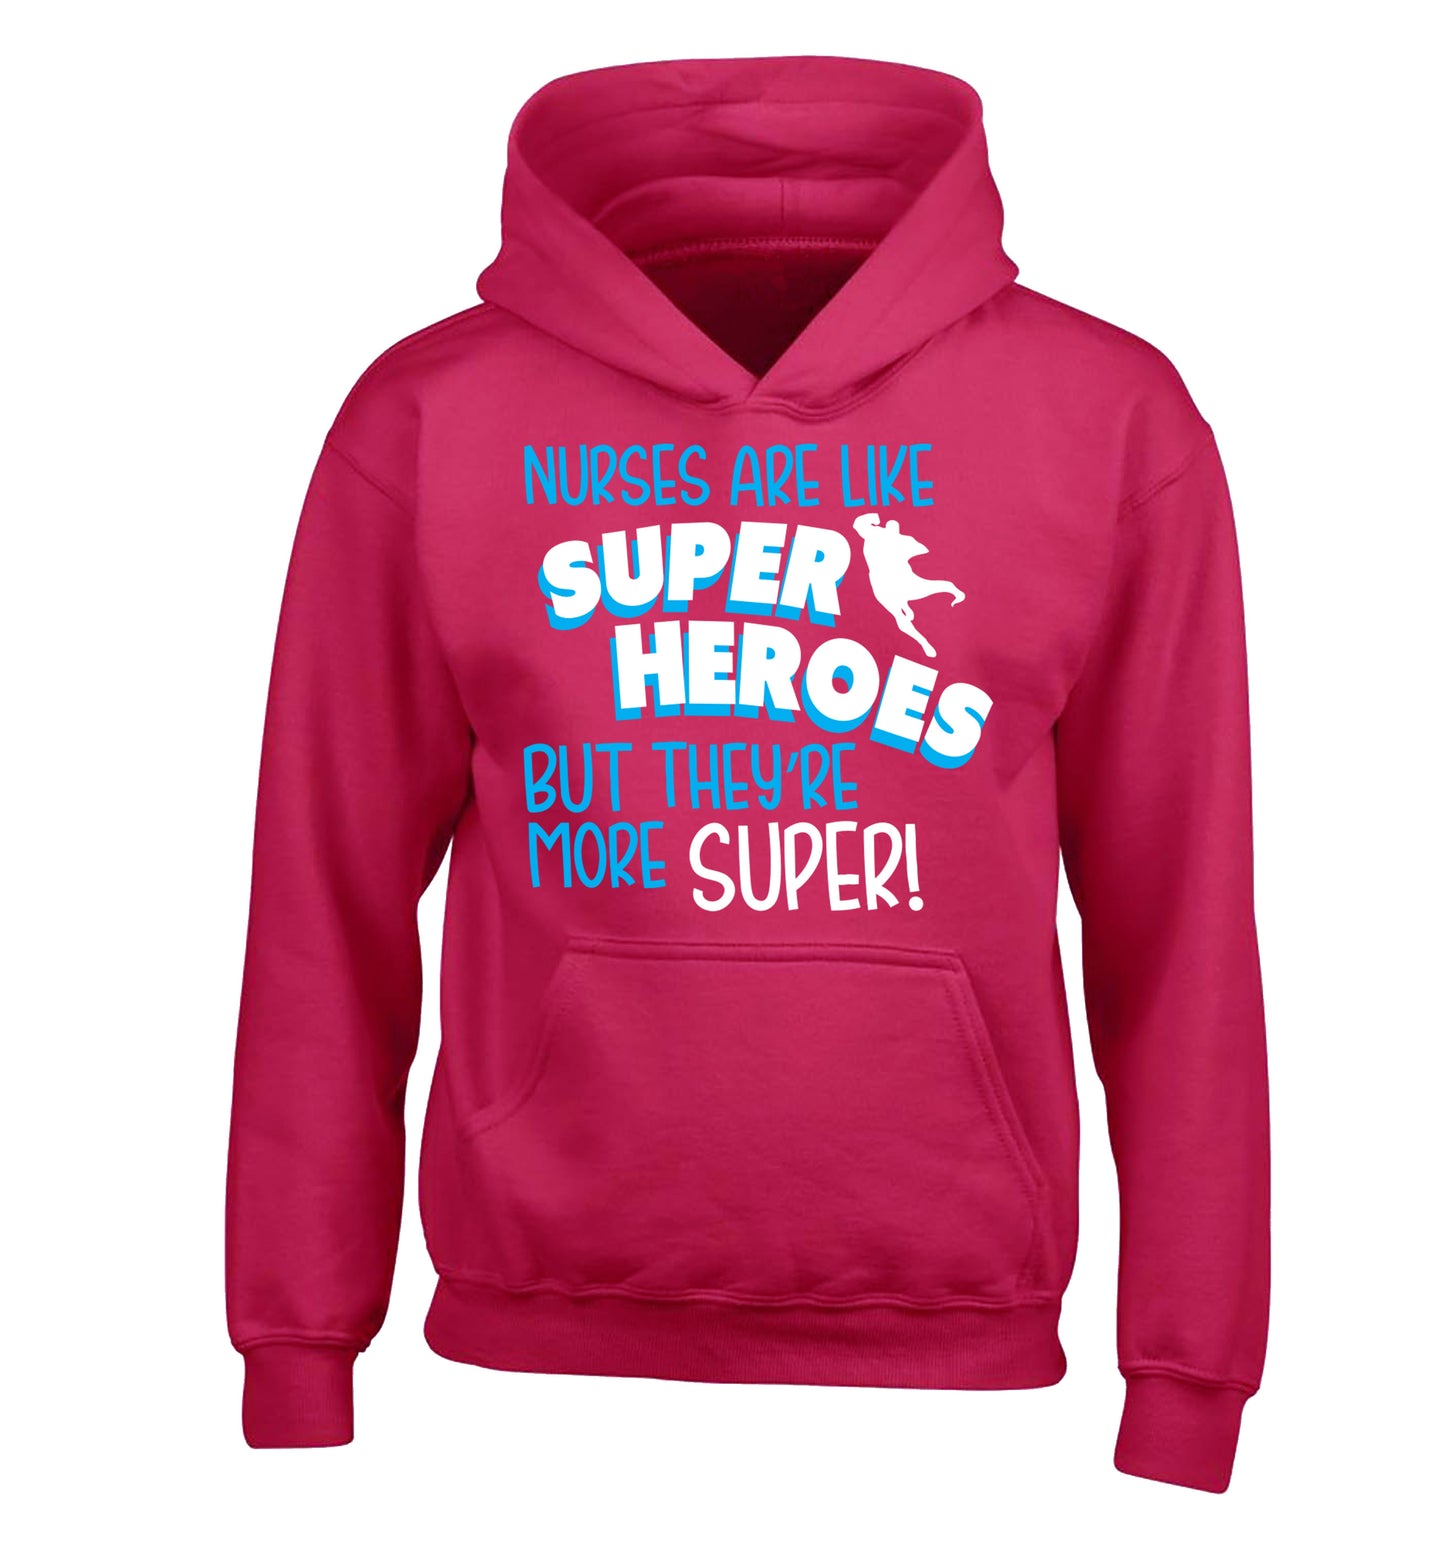 Nurses are like superheros but they're more super children's pink hoodie 12-13 Years